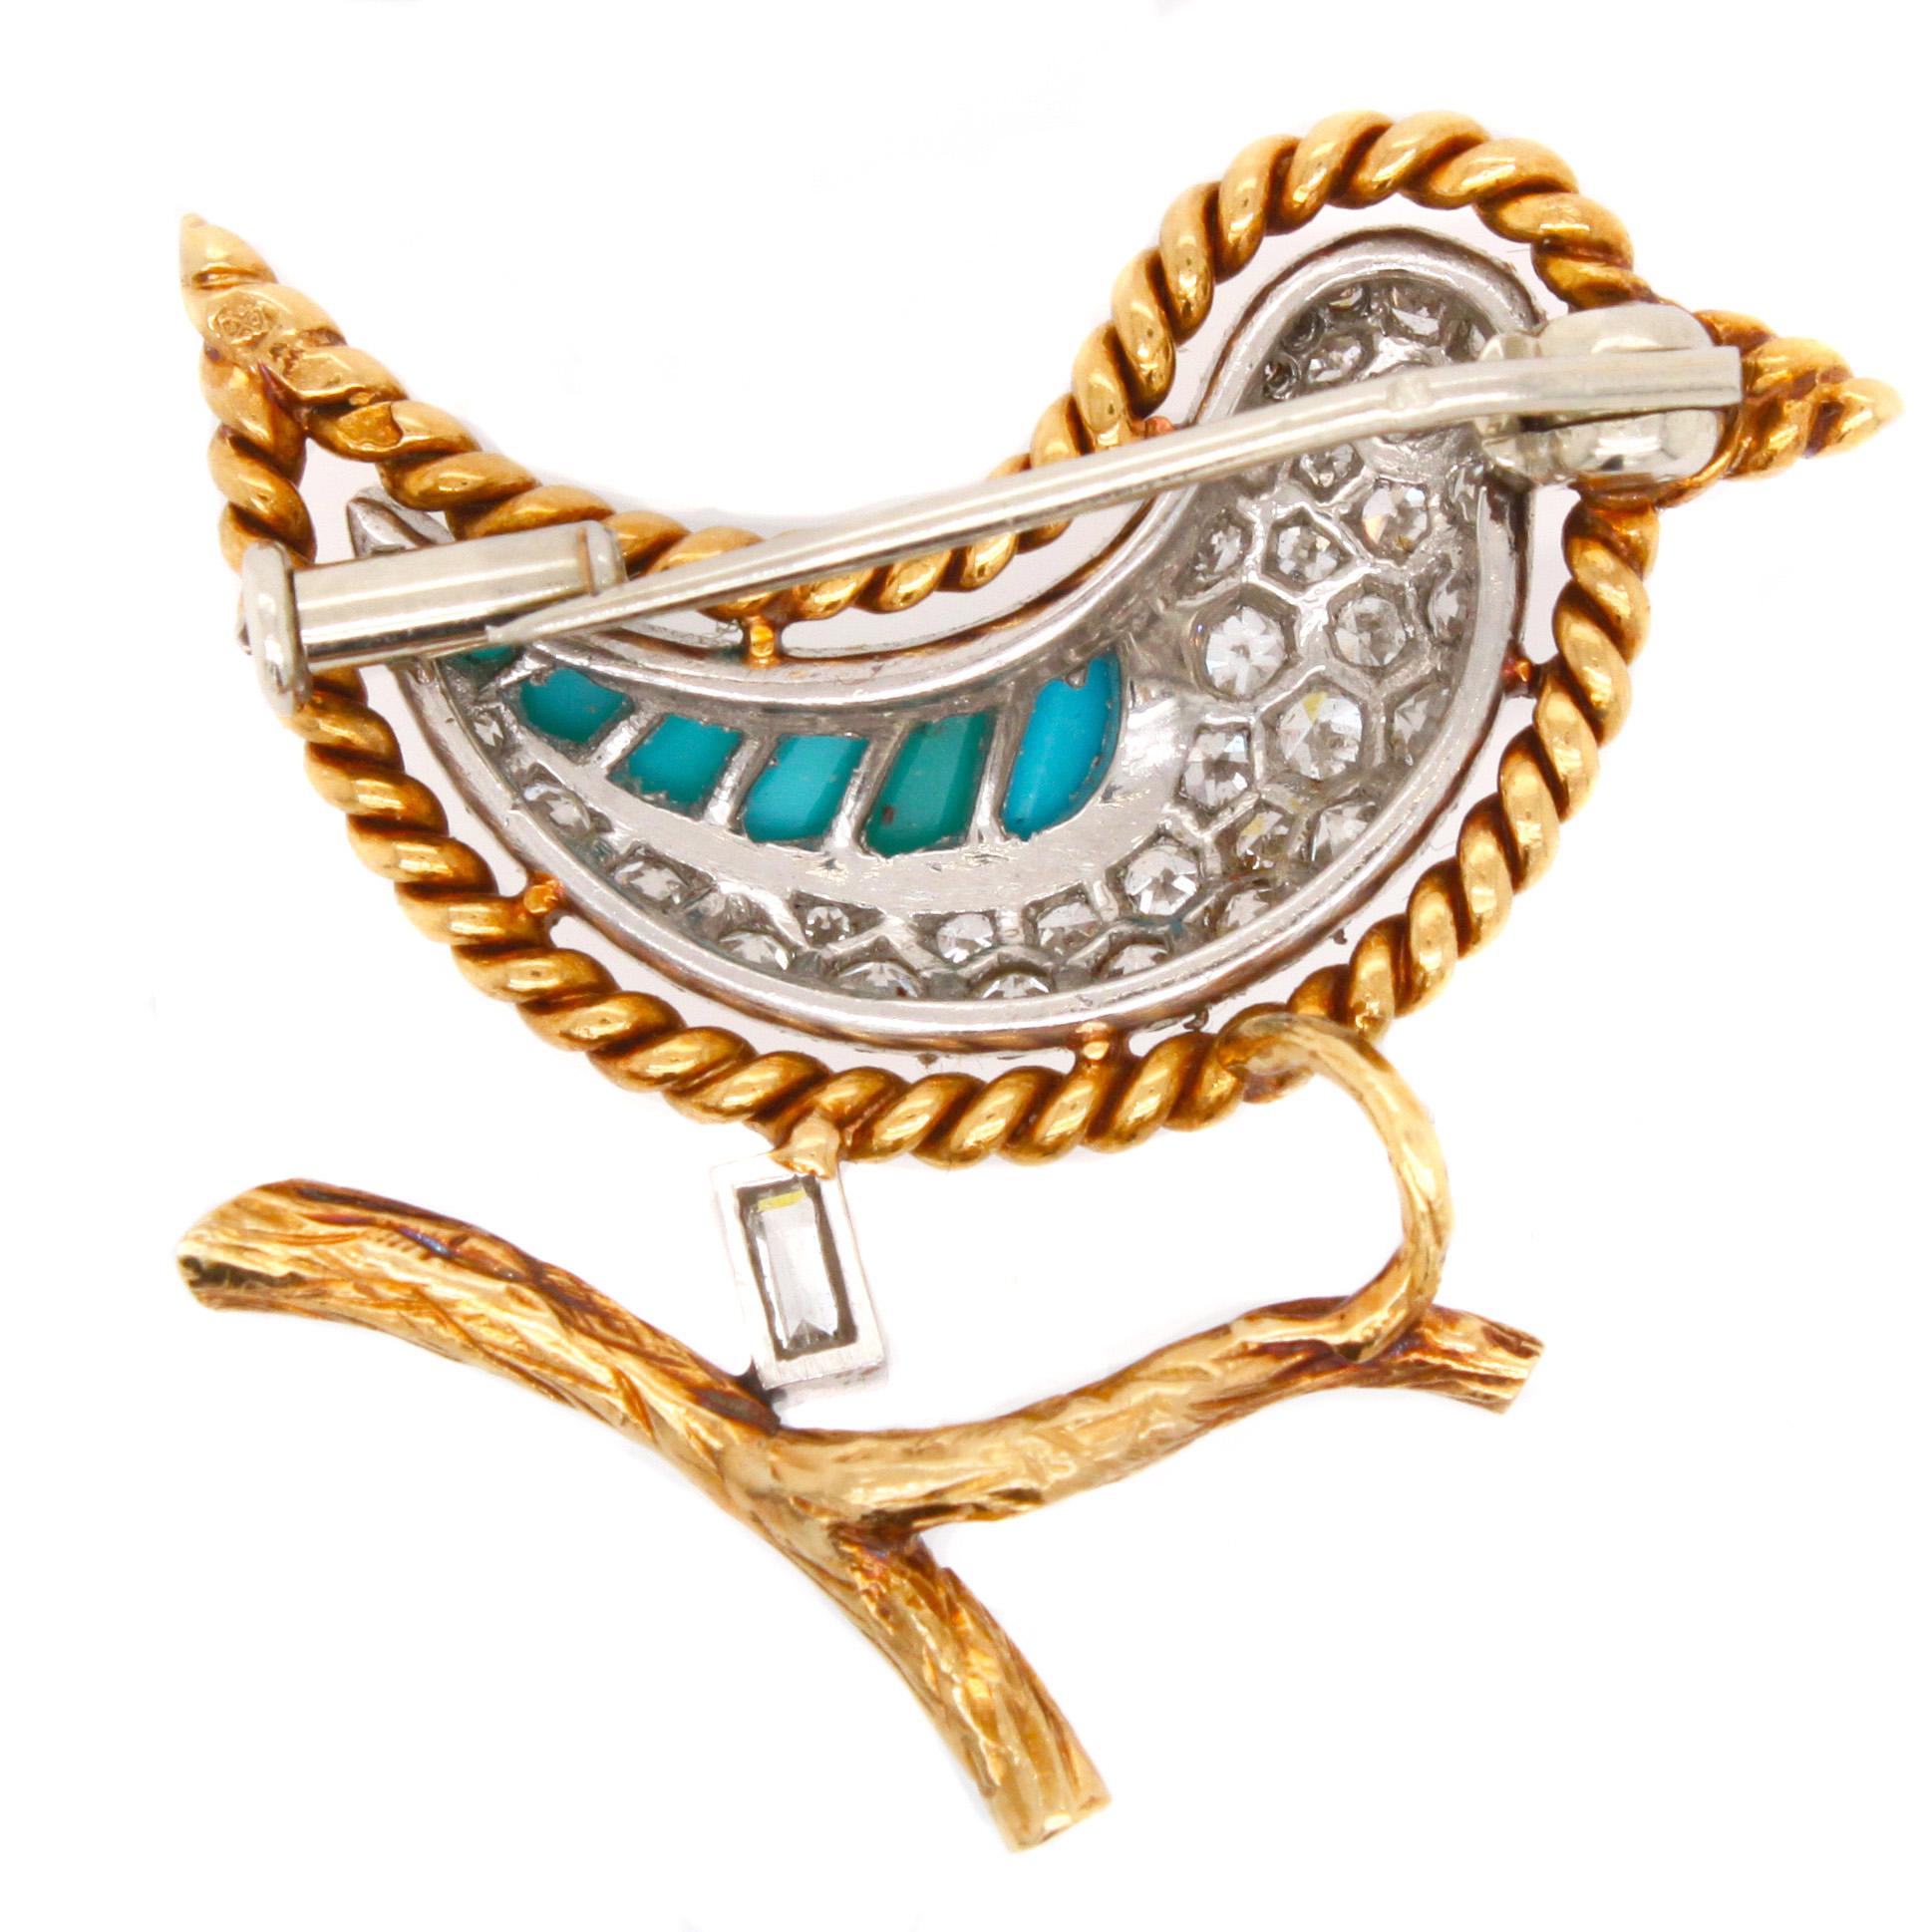 A French 18-carat gold bird brooch with feather shaped cabochon cut turquoises and round diamonds ca. 0.8ct set in platinum. The eye is set with a ruby cabochon. The bird is perched on a gold branch with an emerald-cut diamond. The gold outline of